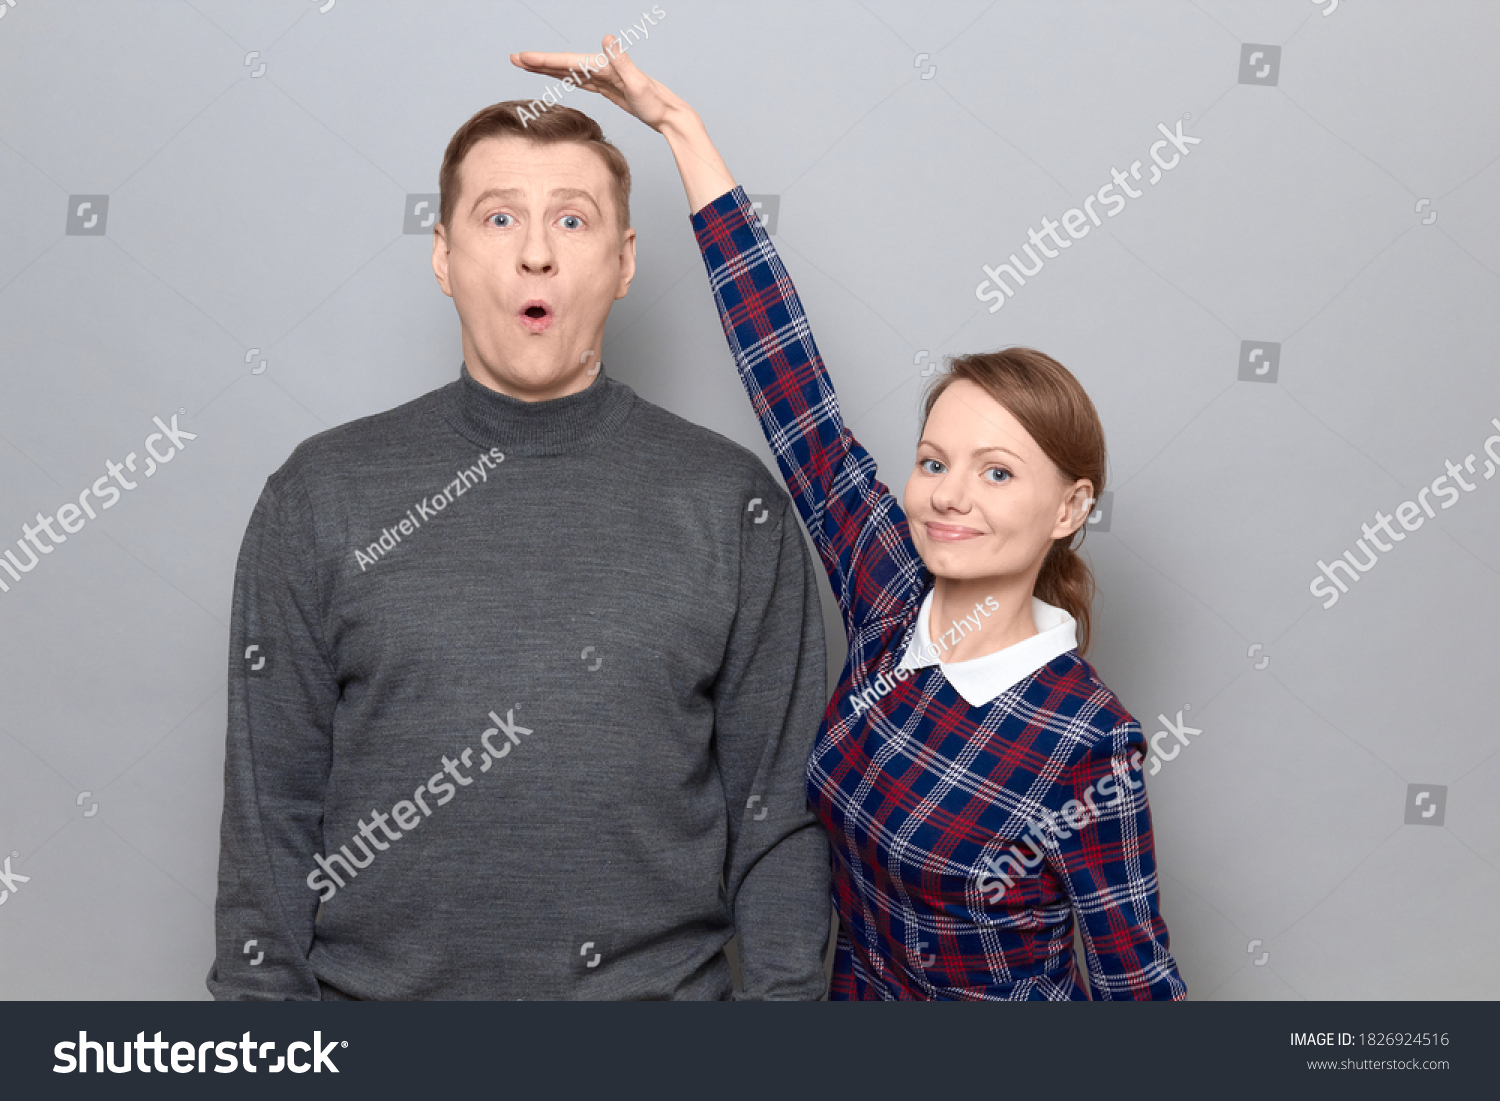 Studio shot of short woman standing and showing height of tall man, woman is smiling, man is amazed, over gray background. Concept of diversity of people's heights, tall and short persons #1826924516